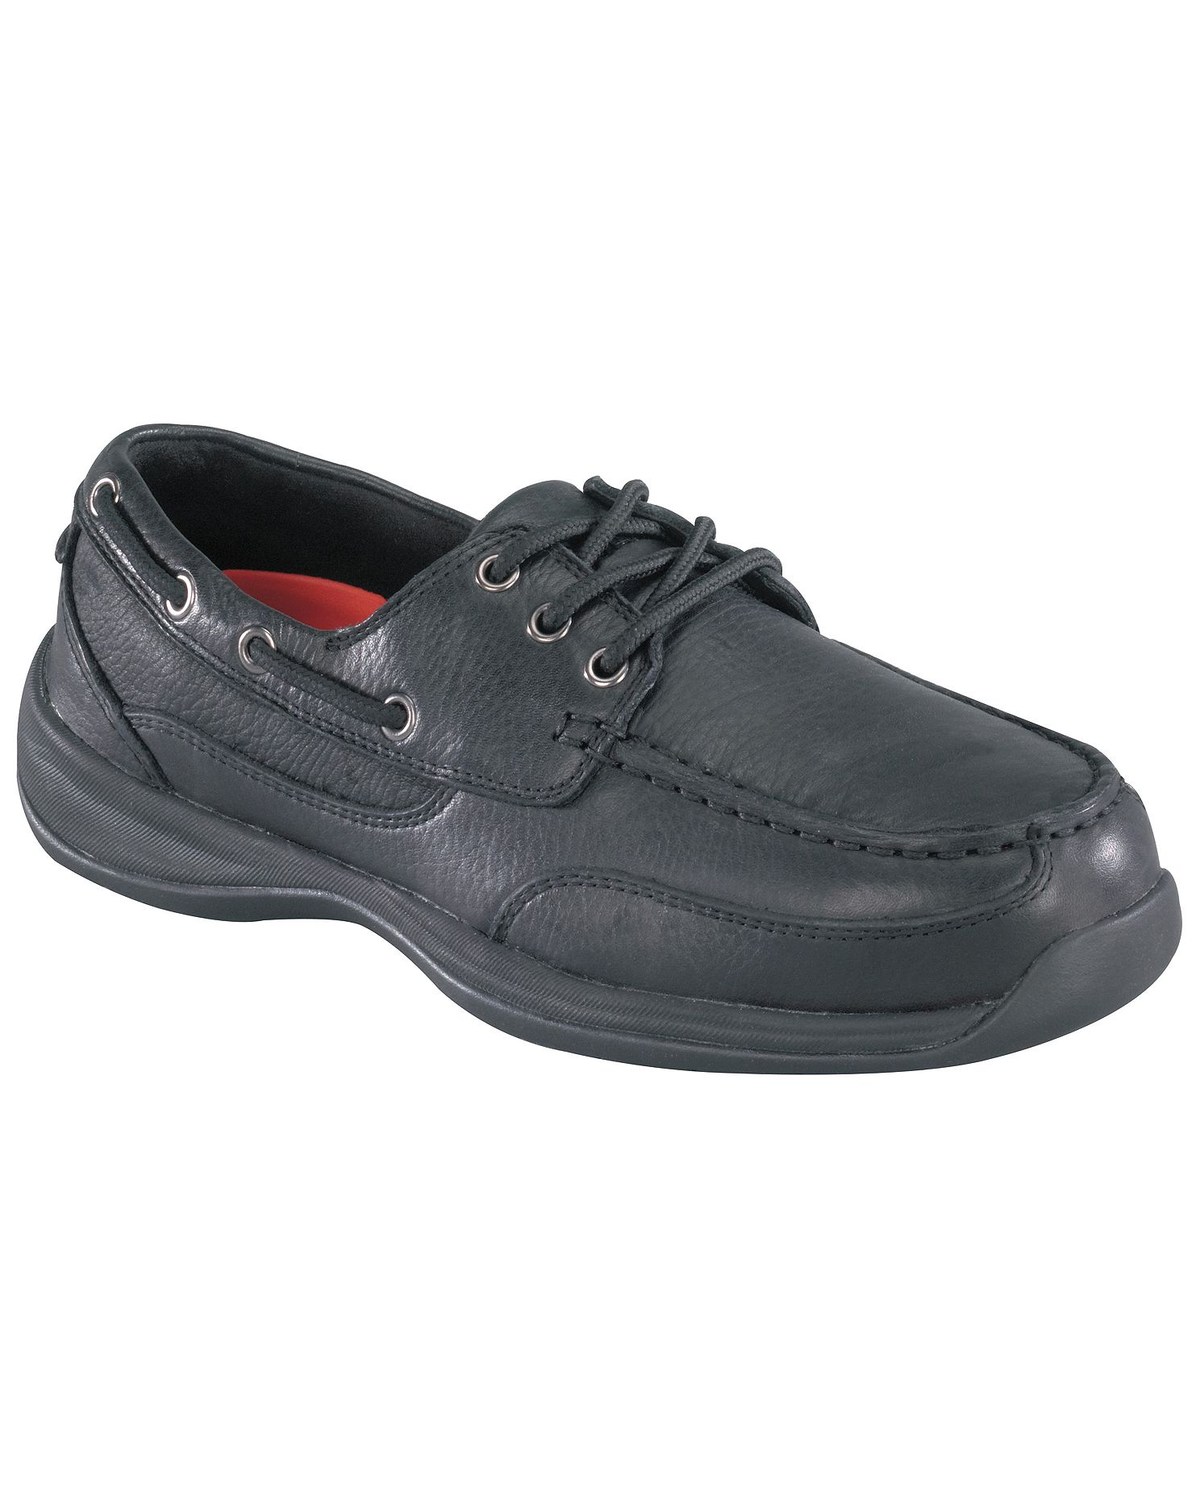 Rockport Works Women's Sailing Club Boat Shoes